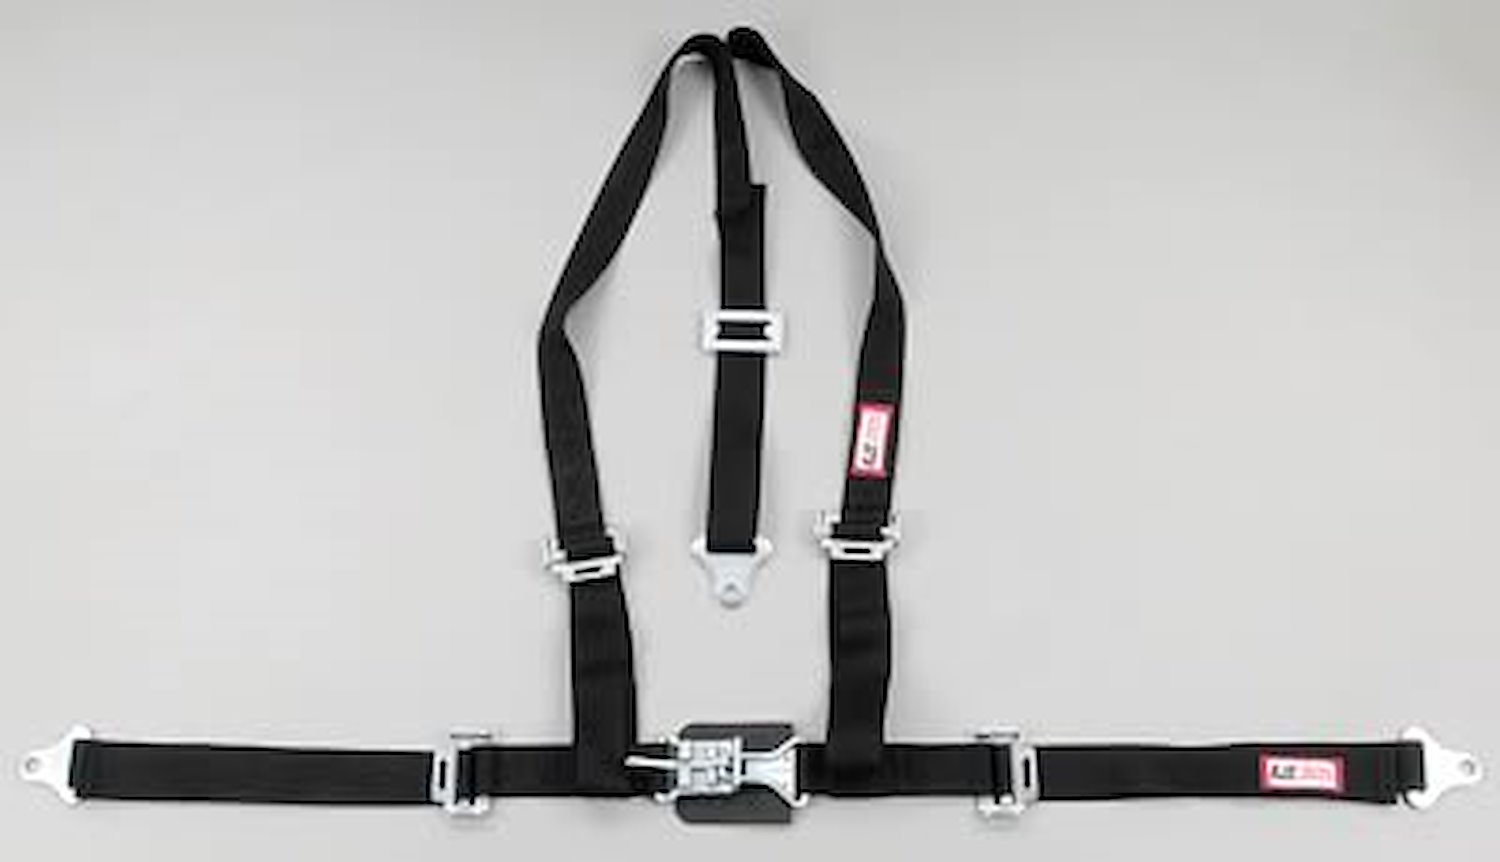 NON-SFI L&L HARNESS 2 PULL DOWN Lap Belt SNAP SEWN IN 2 S.H. INDIVIDUAL FLOOR Mount WRAP/BOLT BLUE